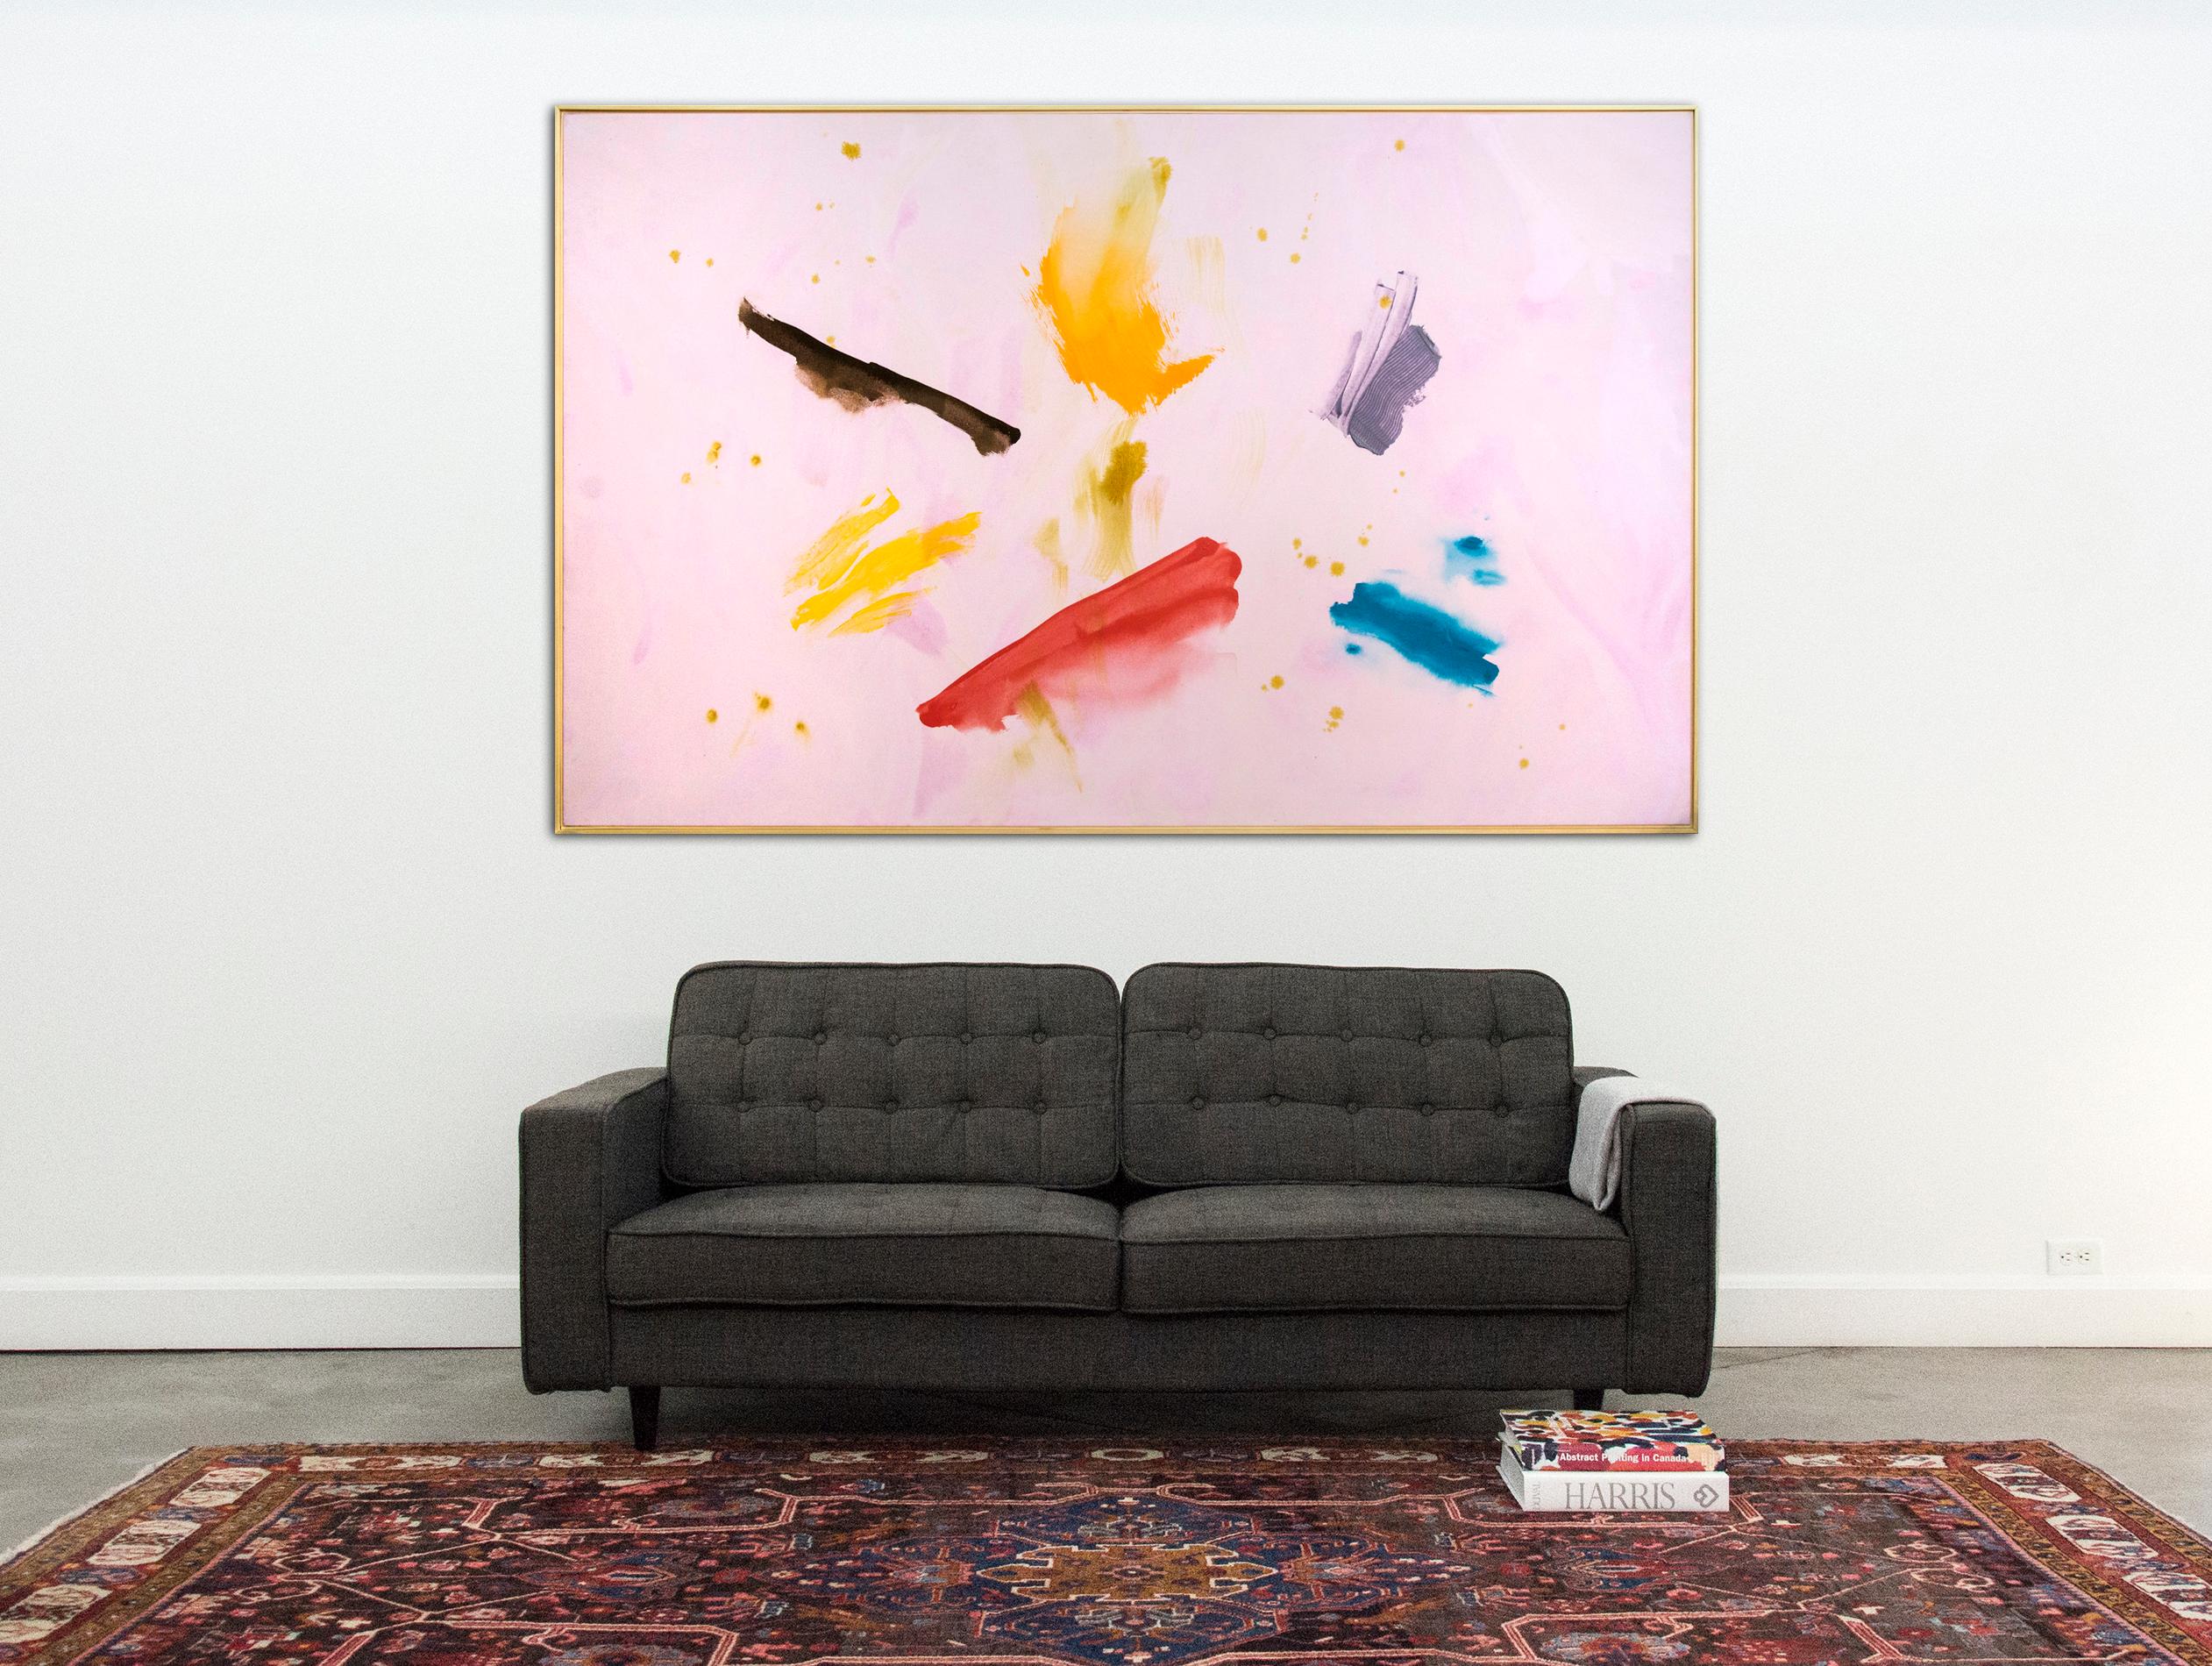 Summering - Expressive strokes of red, blue, yellow and mauve - Painting by Milly Ristvedt